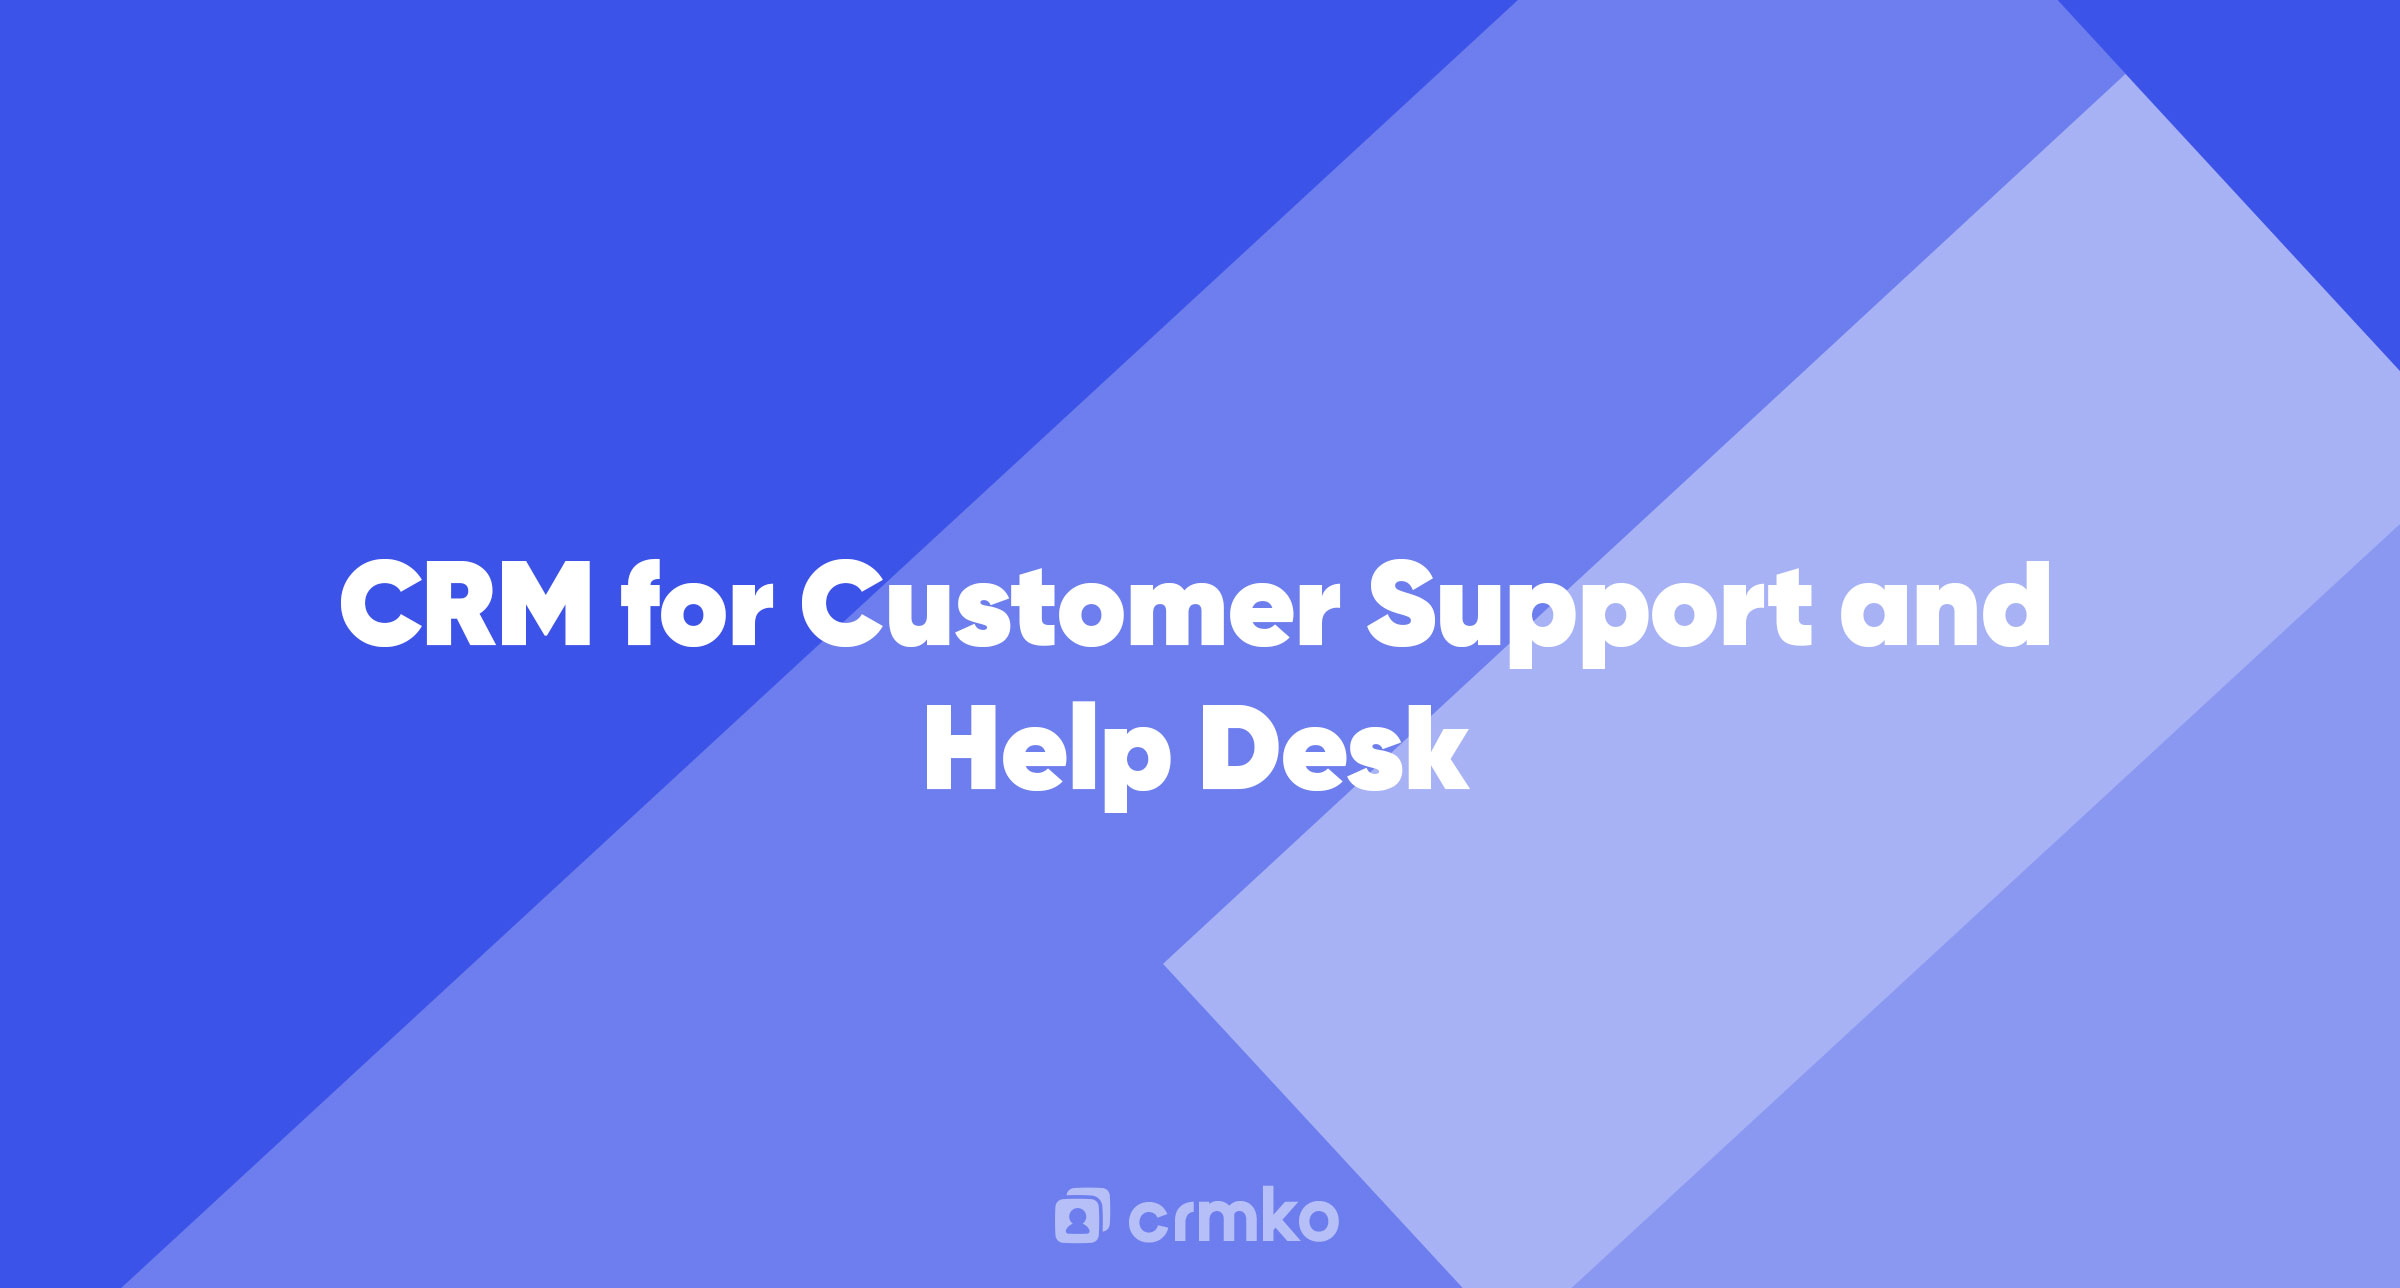 Article | CRM for Customer Support and Help Desk